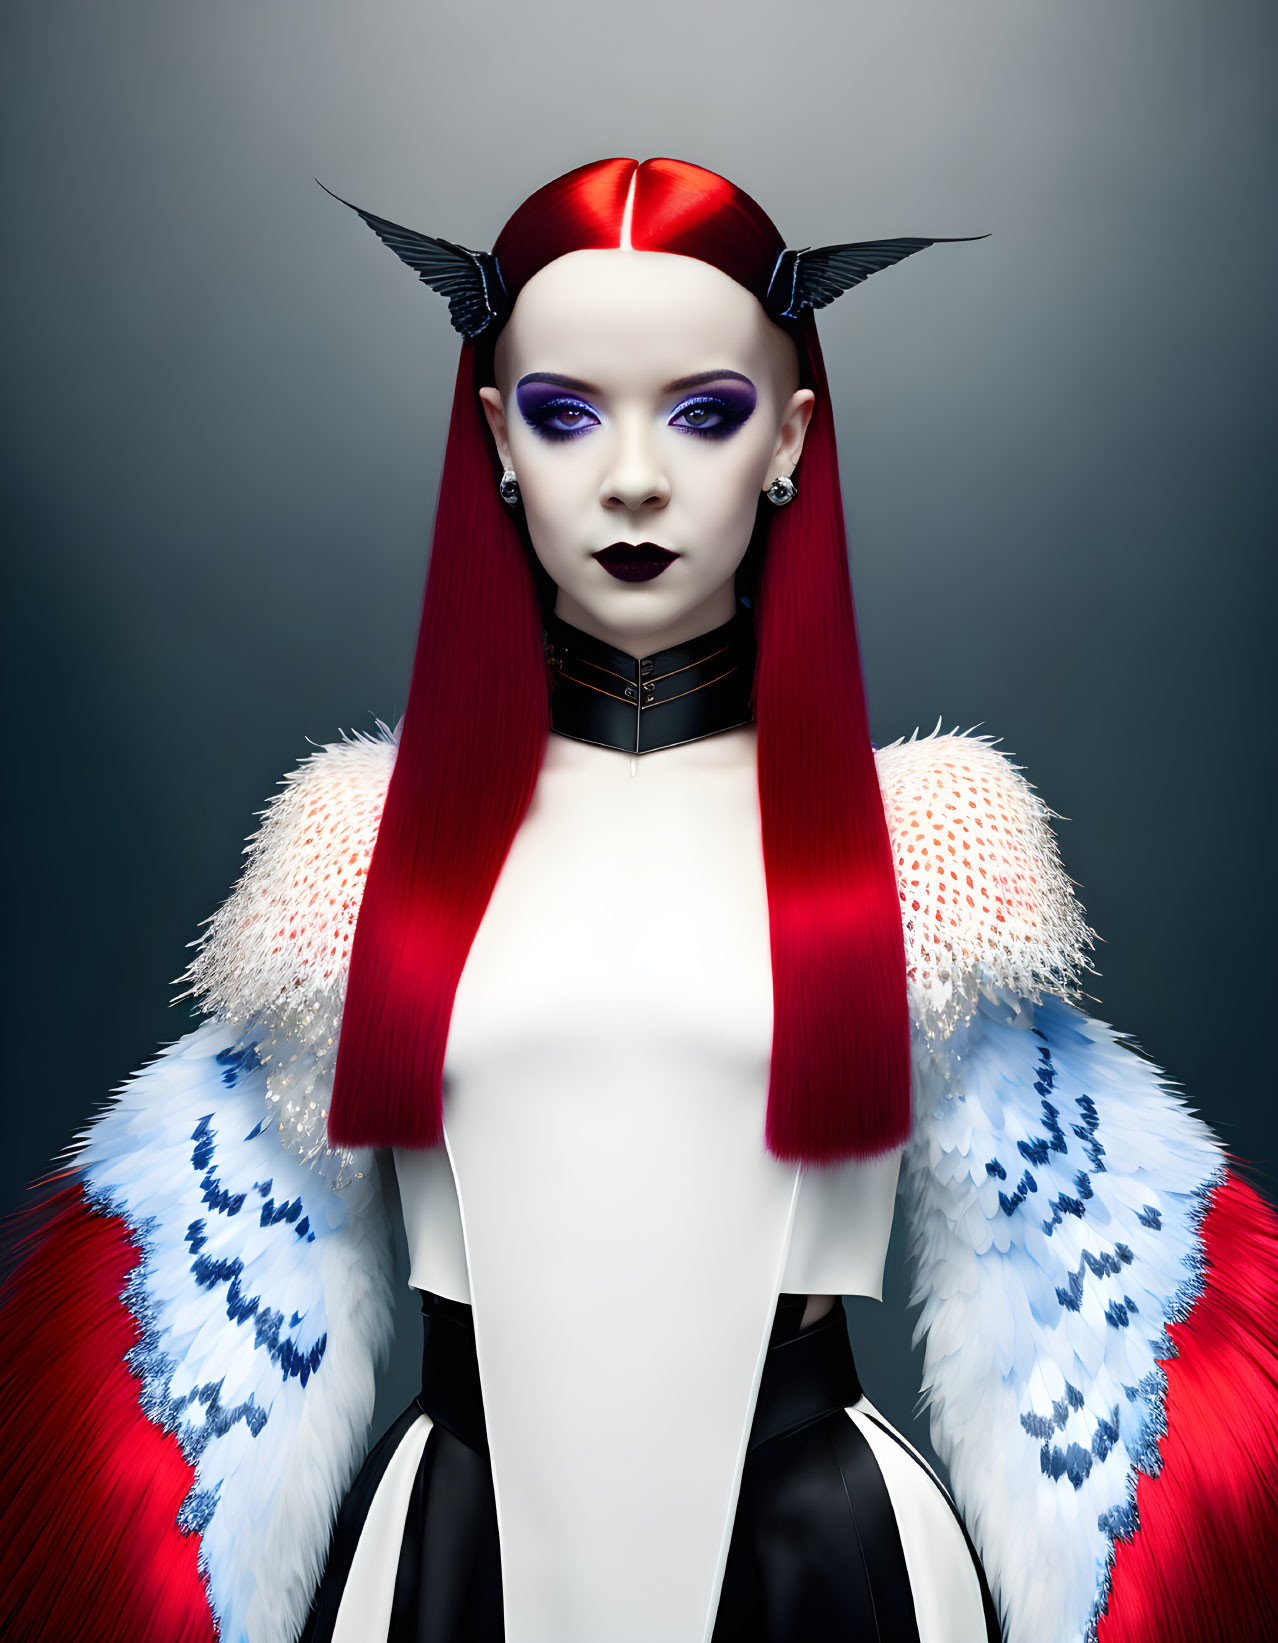 Character with red and white makeup, red hair, horns, high-collar garment with feathers